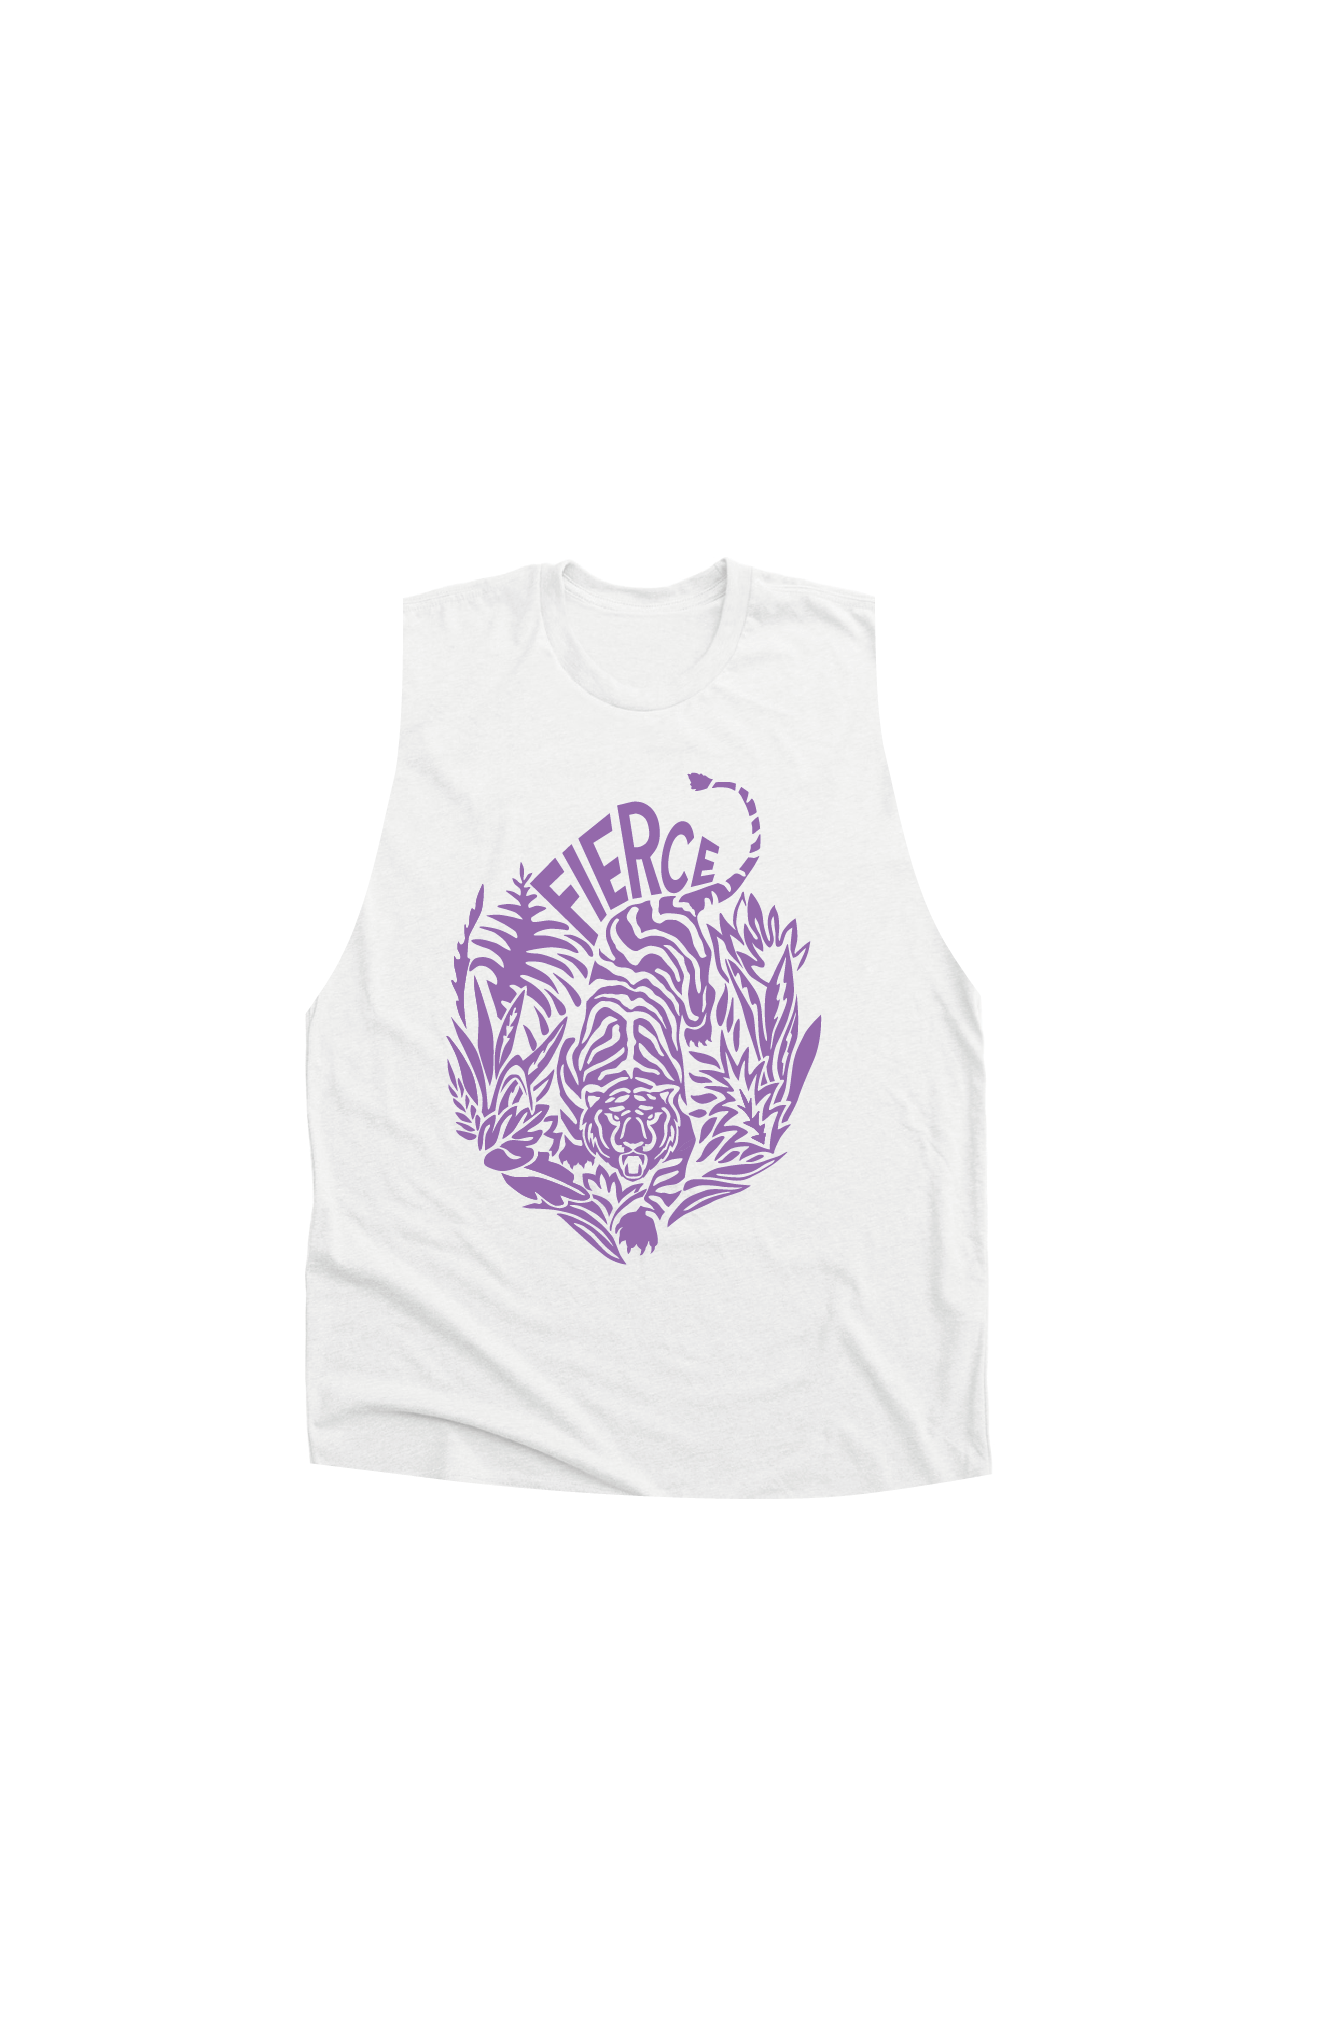 White tank top with tiger print in lilac